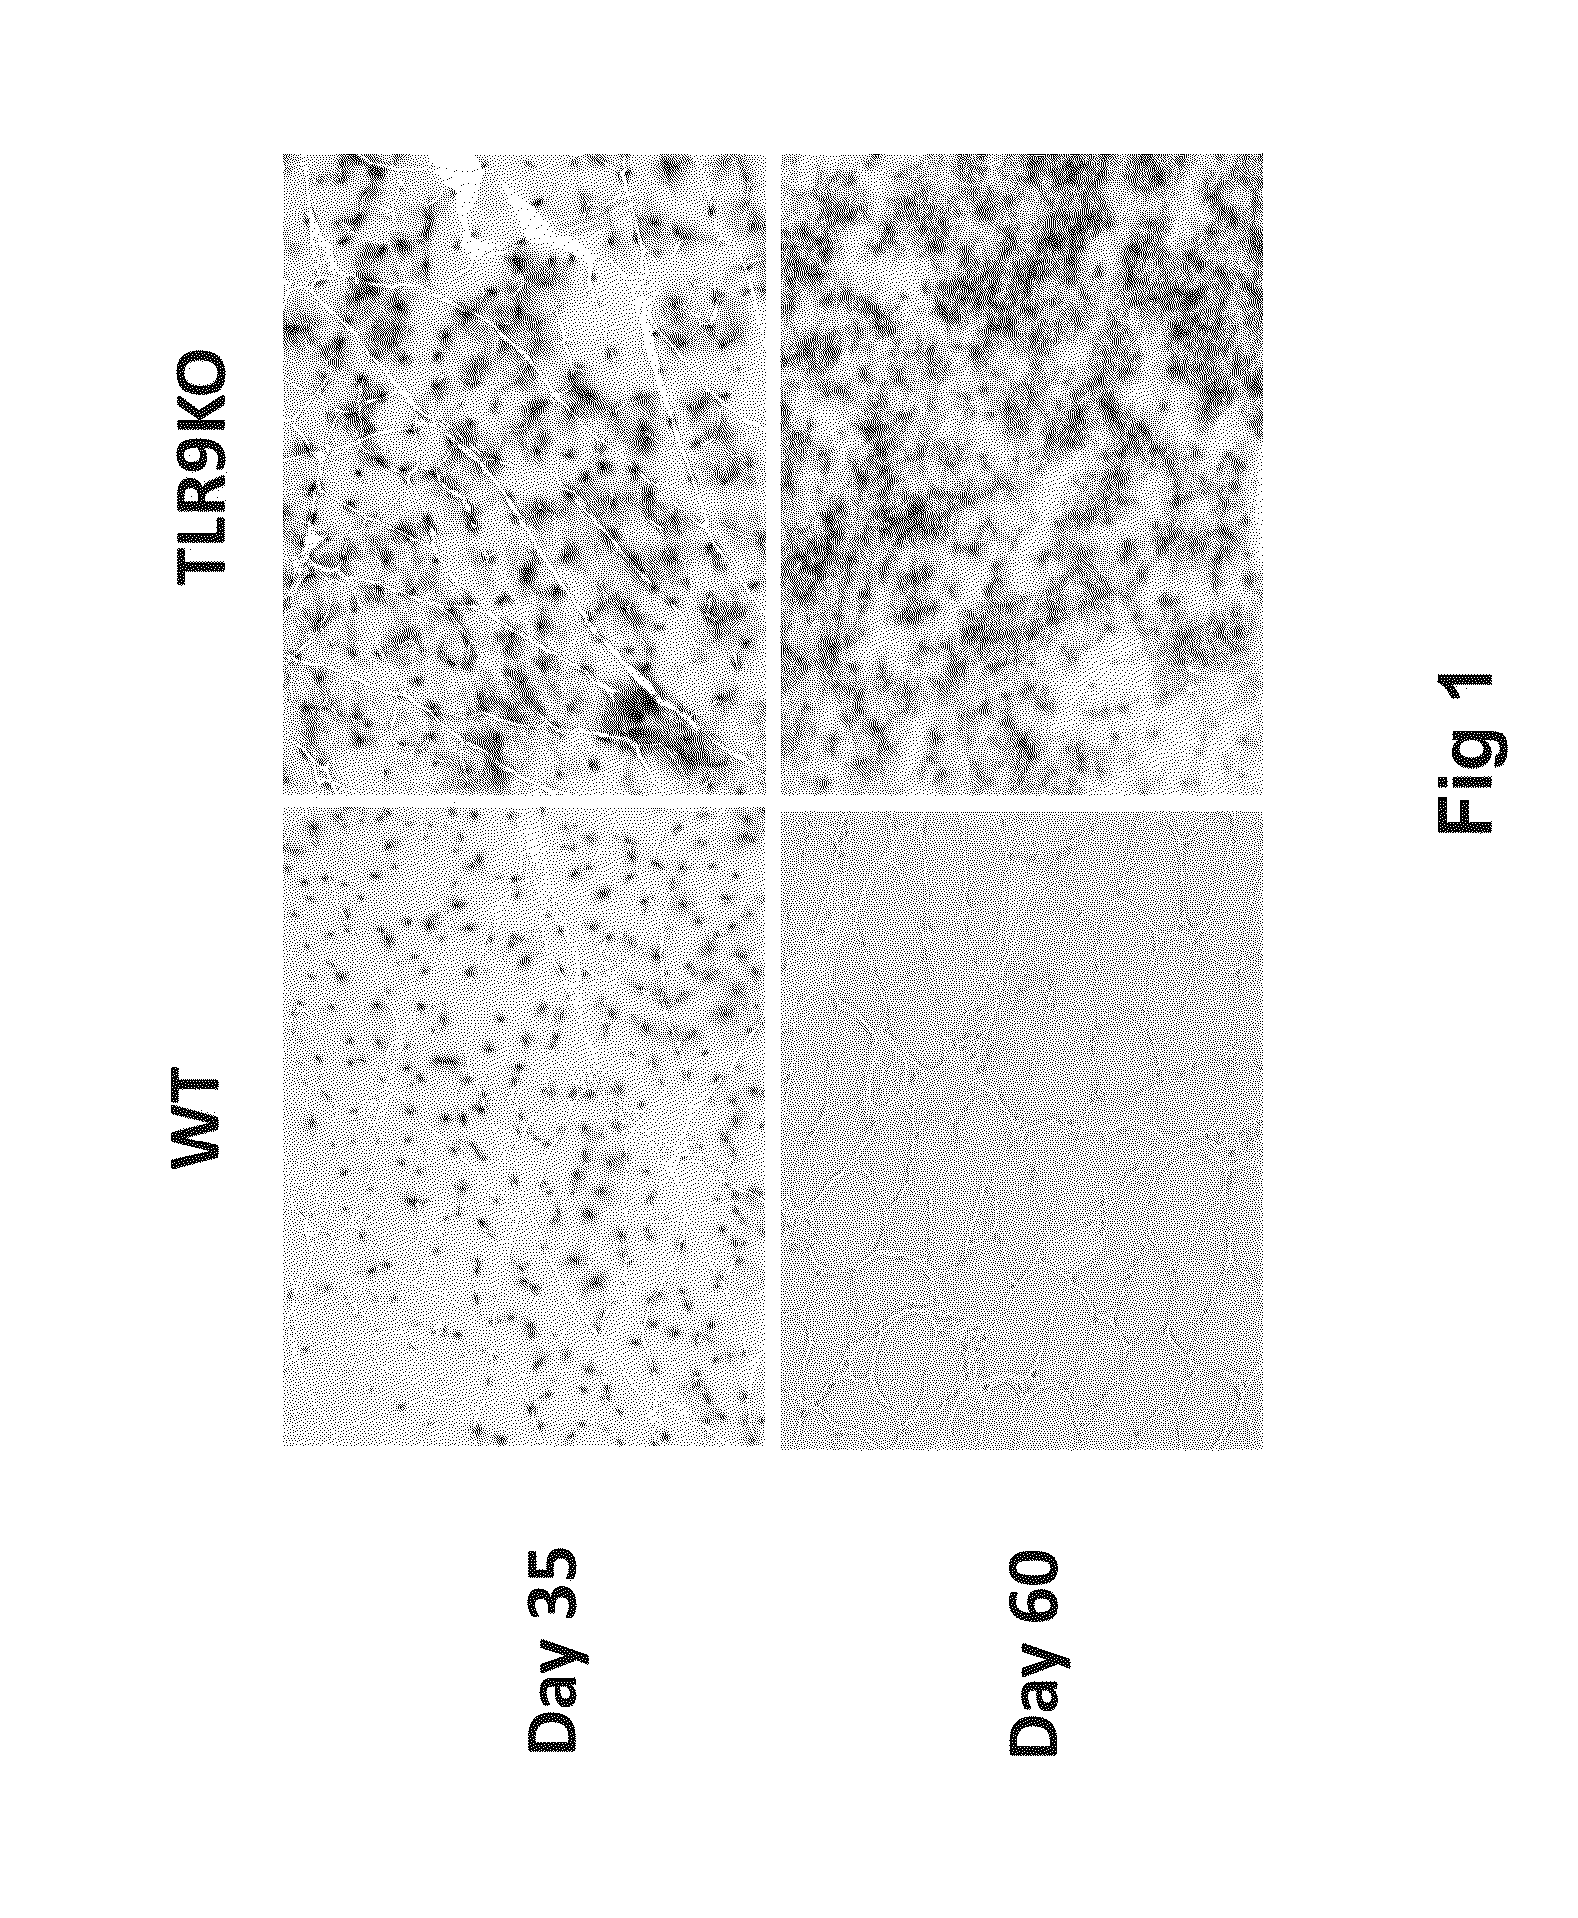 Constructs and methods for delivering molecules via viral vectors with blunted innate immune responses